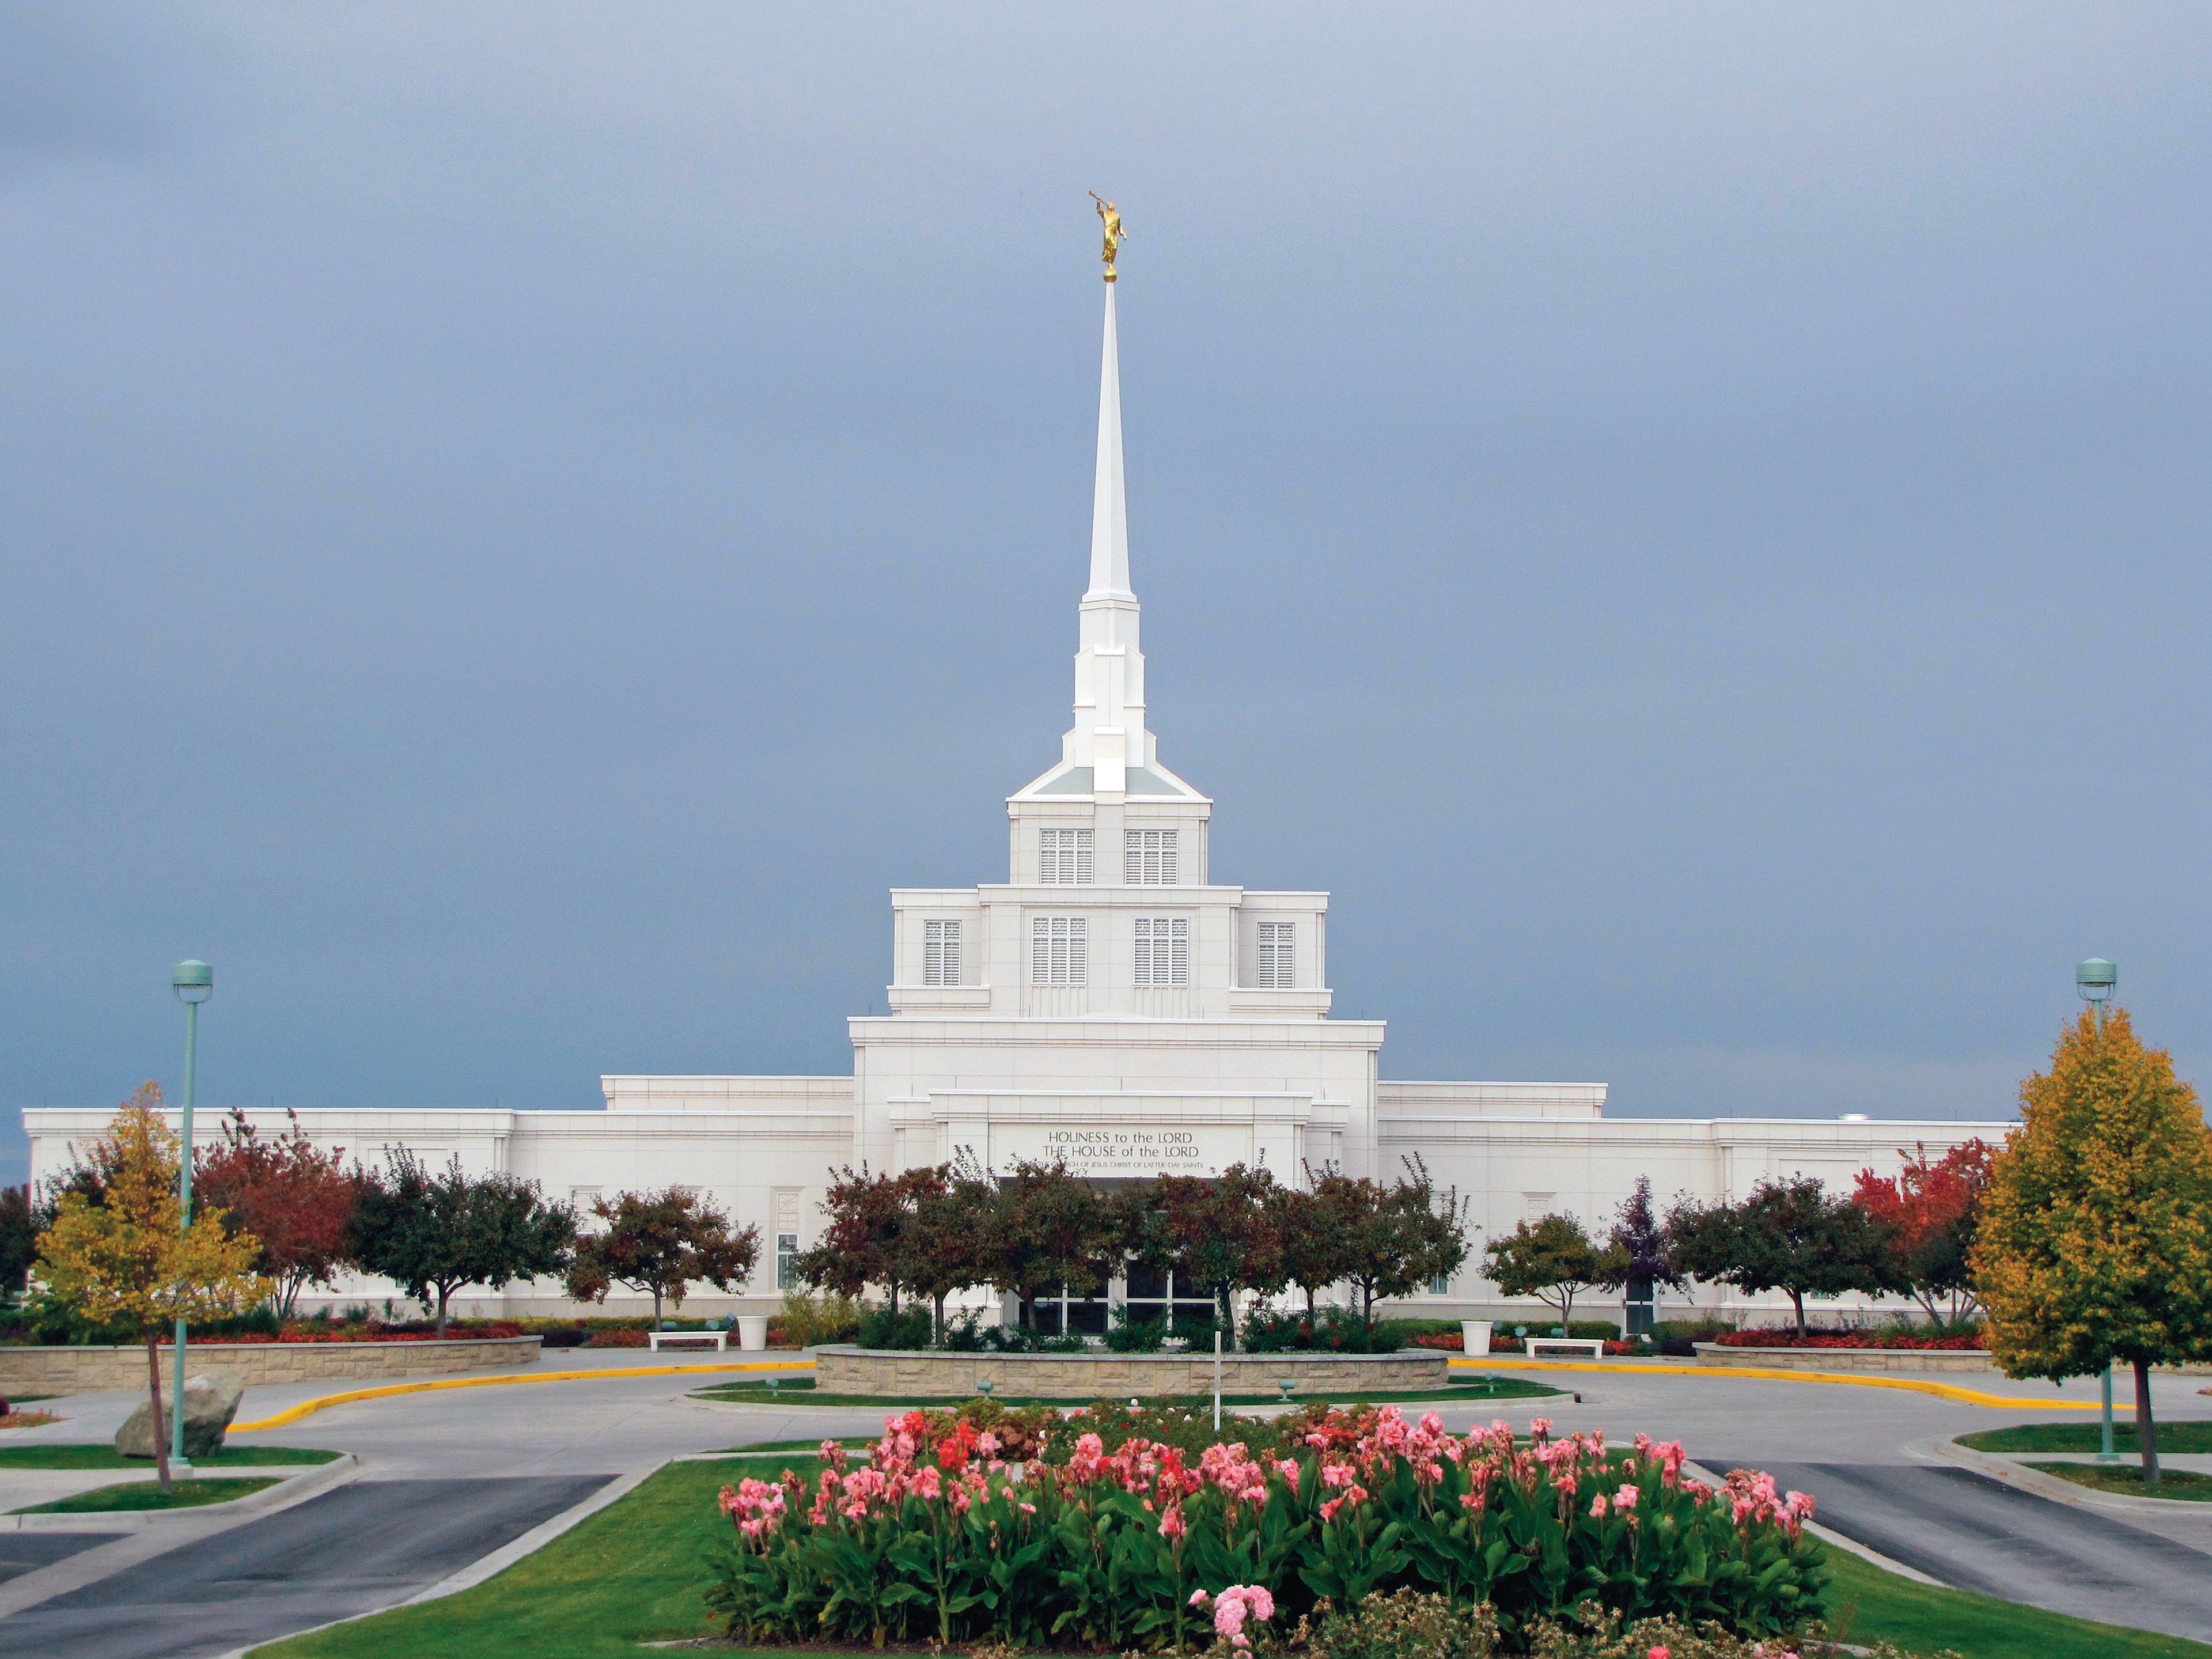 A front view of the Billings Montana Temple and grounds.